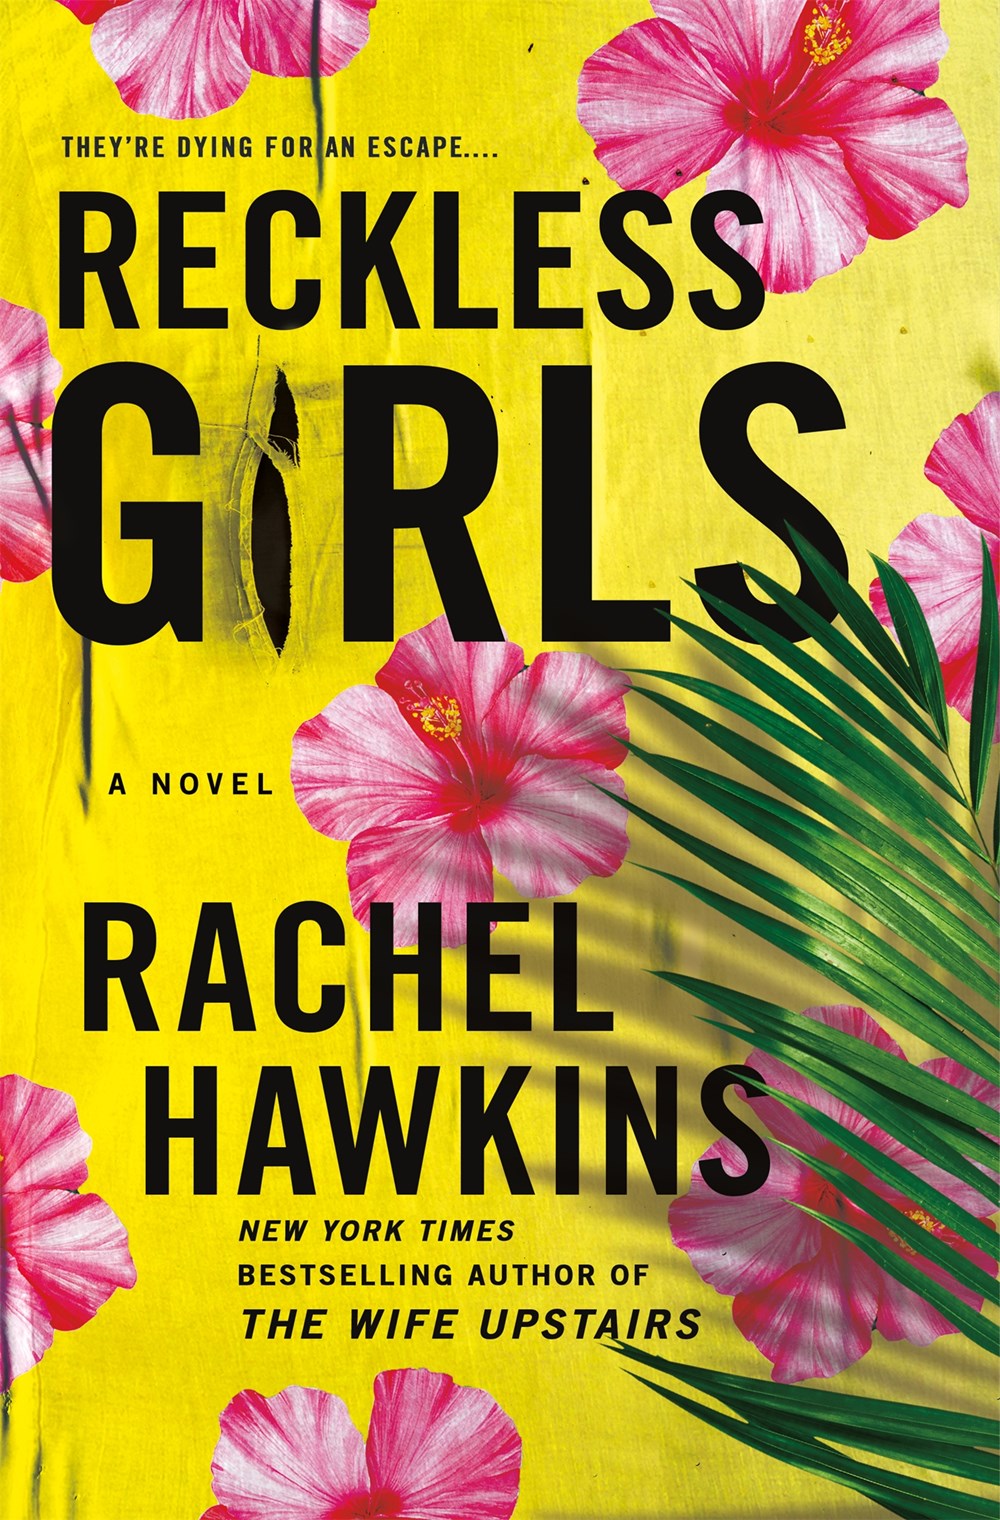 Image of "Reckless Girls"